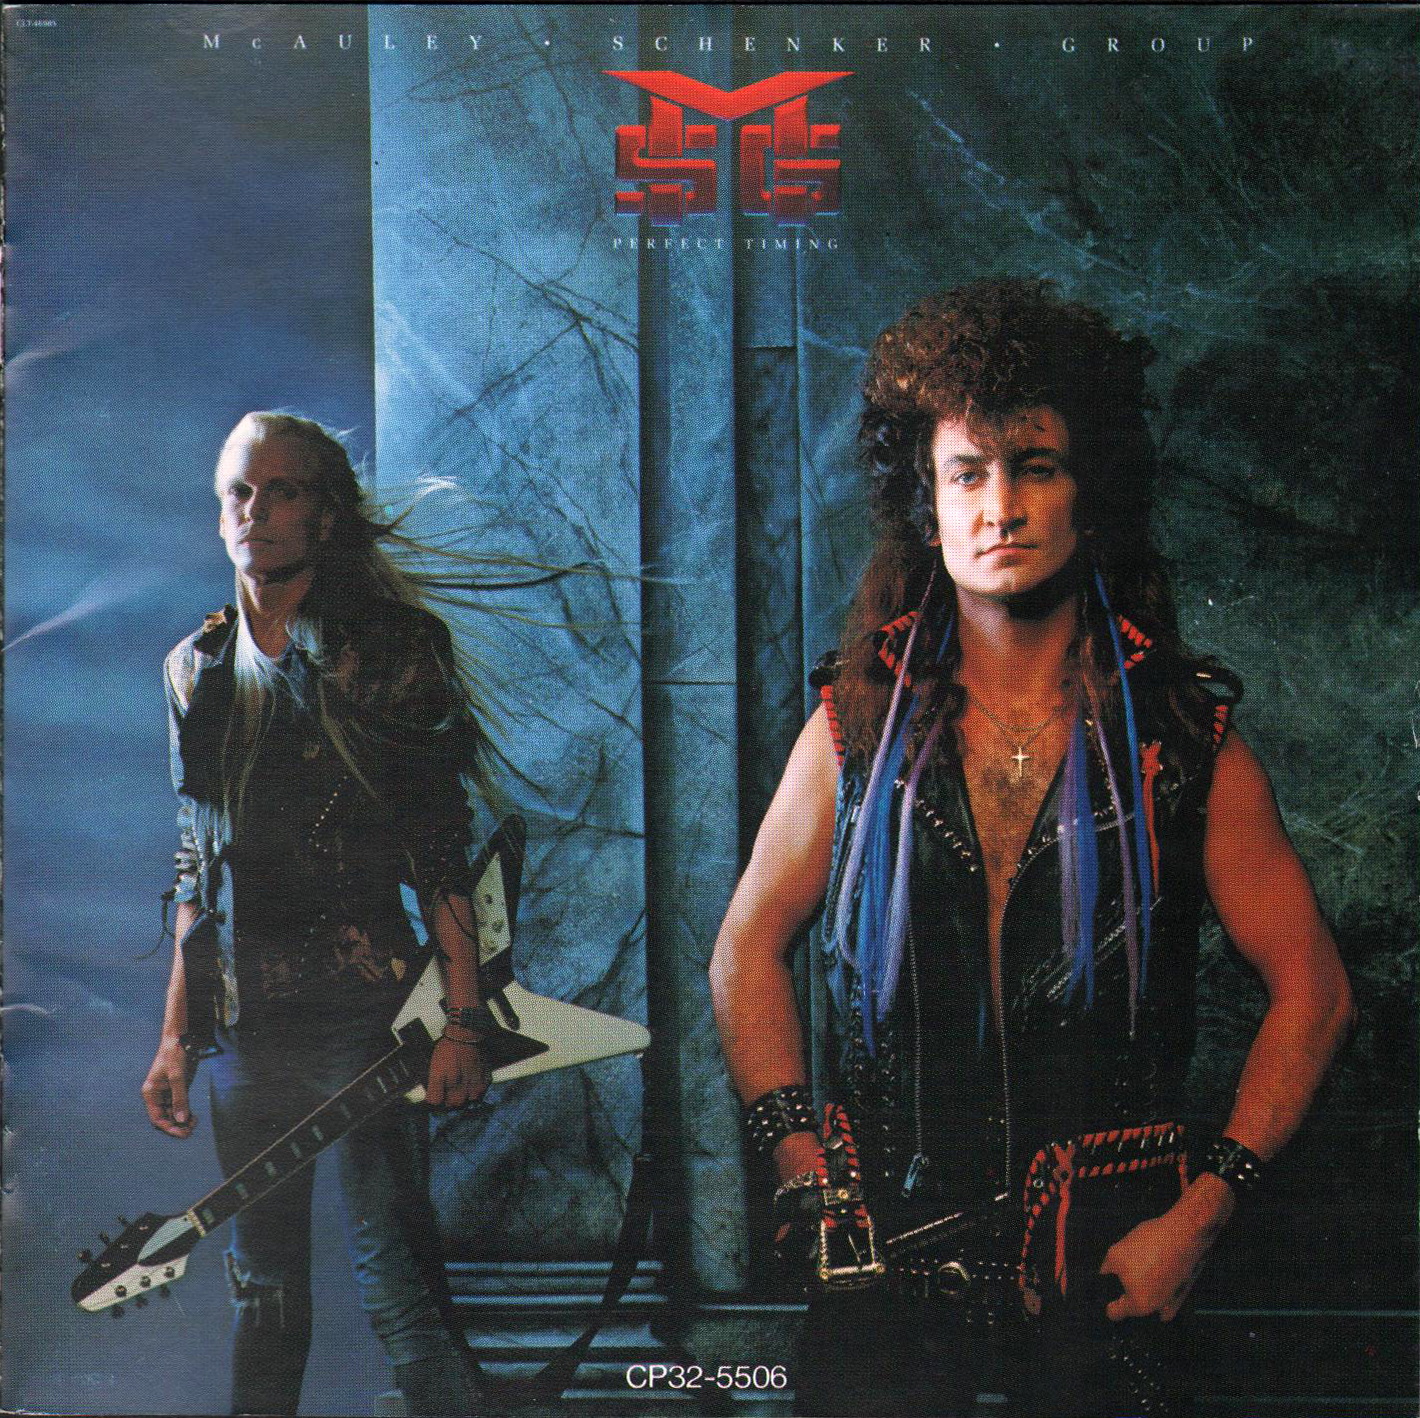 Schenker, Michael - Perfect Timing [McAuley Schenker Group] cover